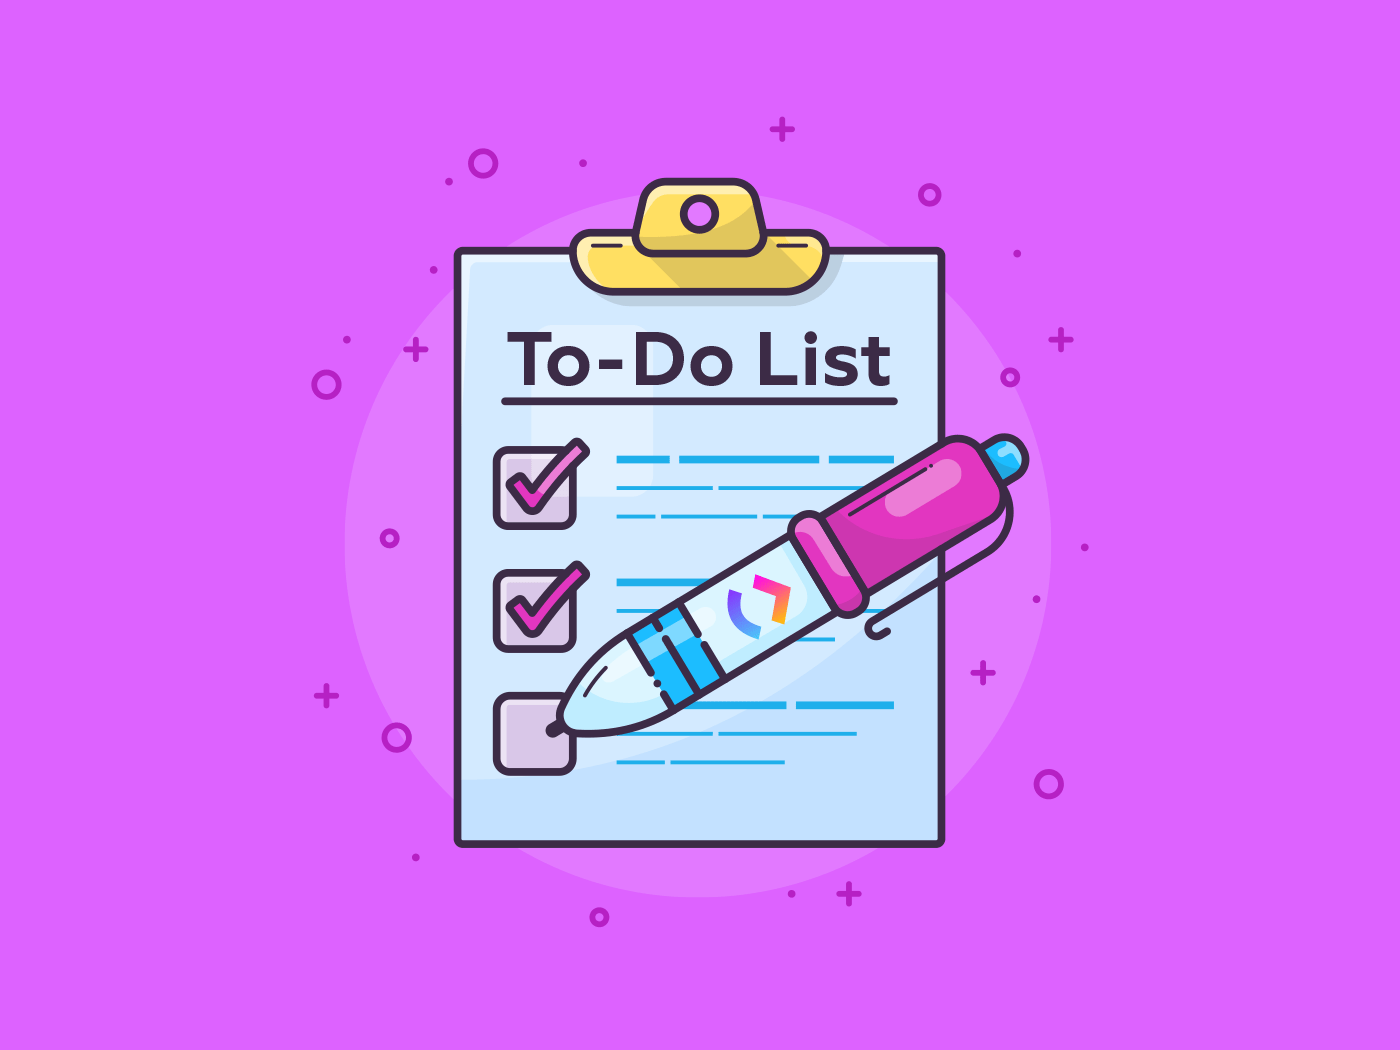 Building a Simple To-Do List Web App with HTML, CSS, and JavaScript